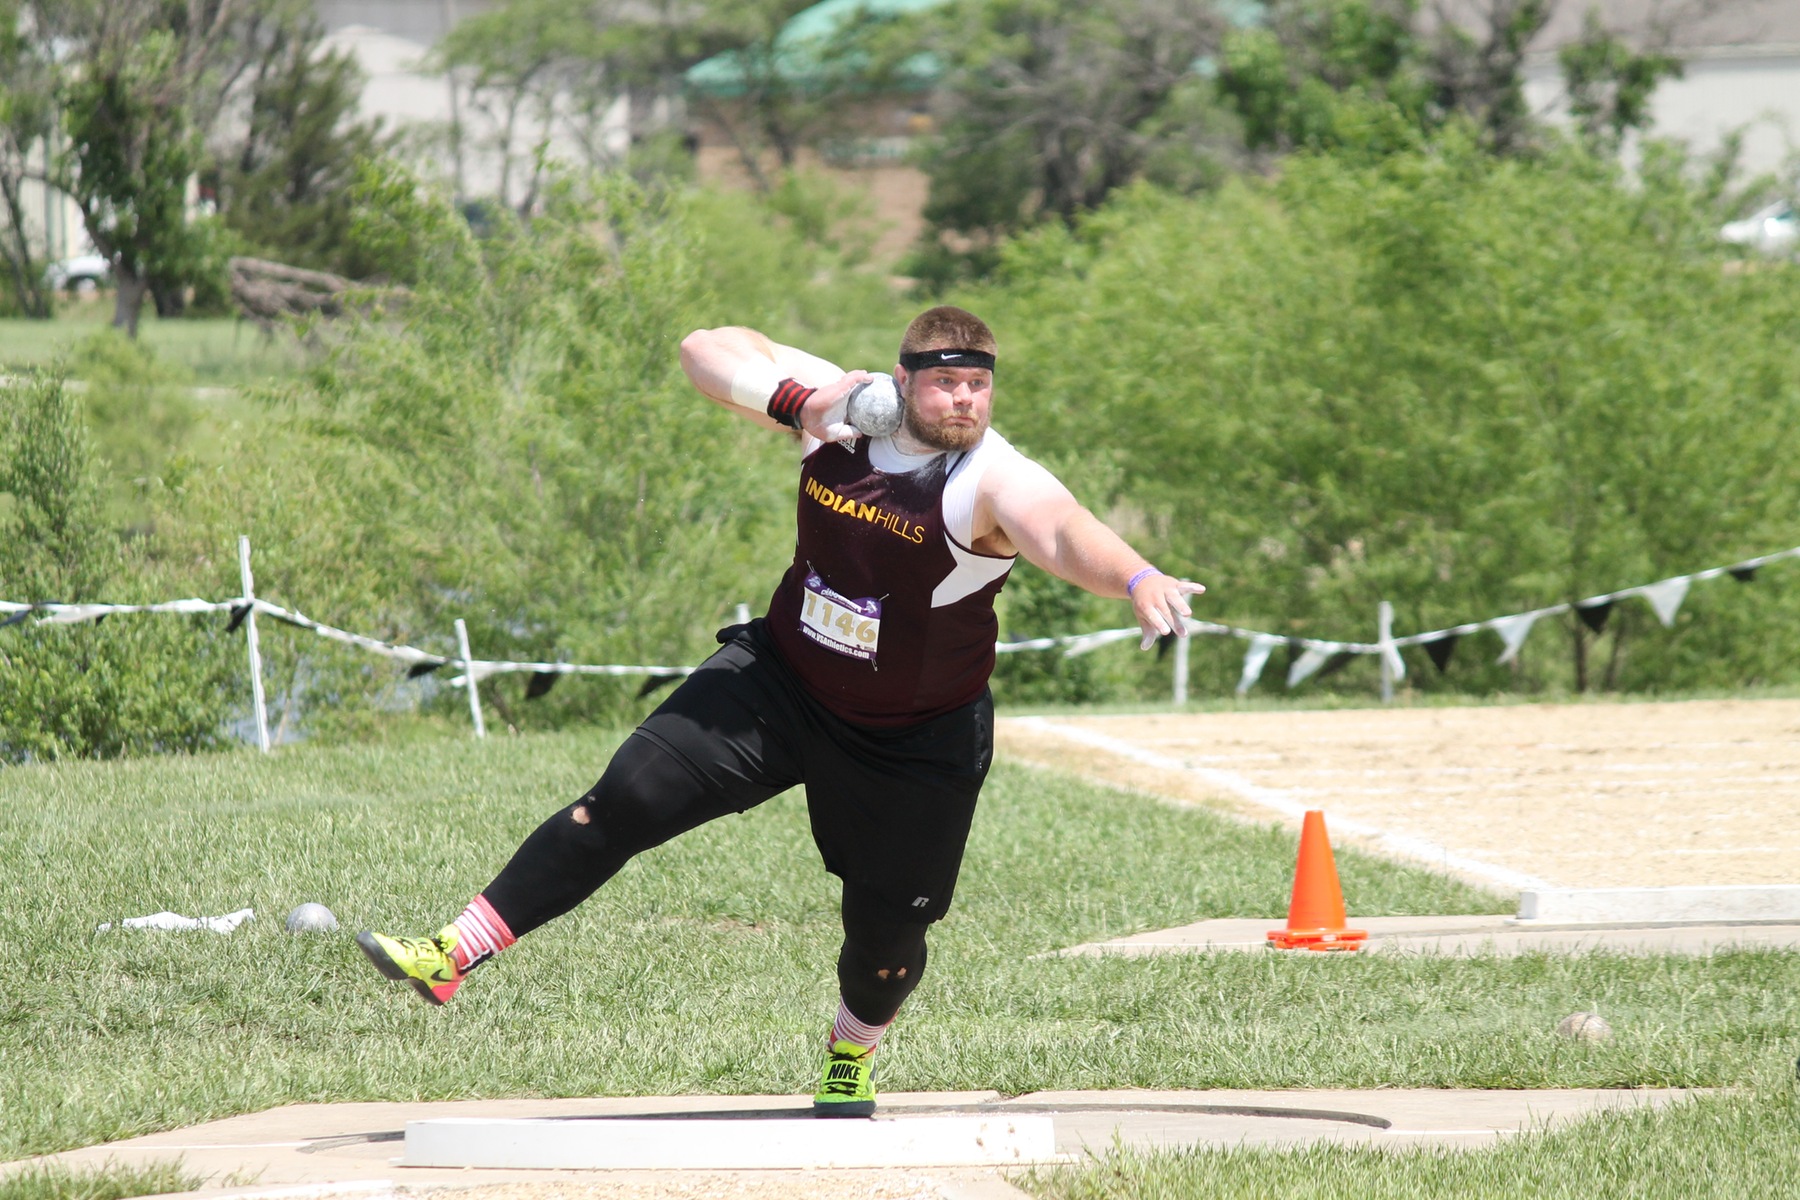 Nathan Winters finished 4th in the shot put at the 2018 NJCAA Outdoor Track & Field National meet.